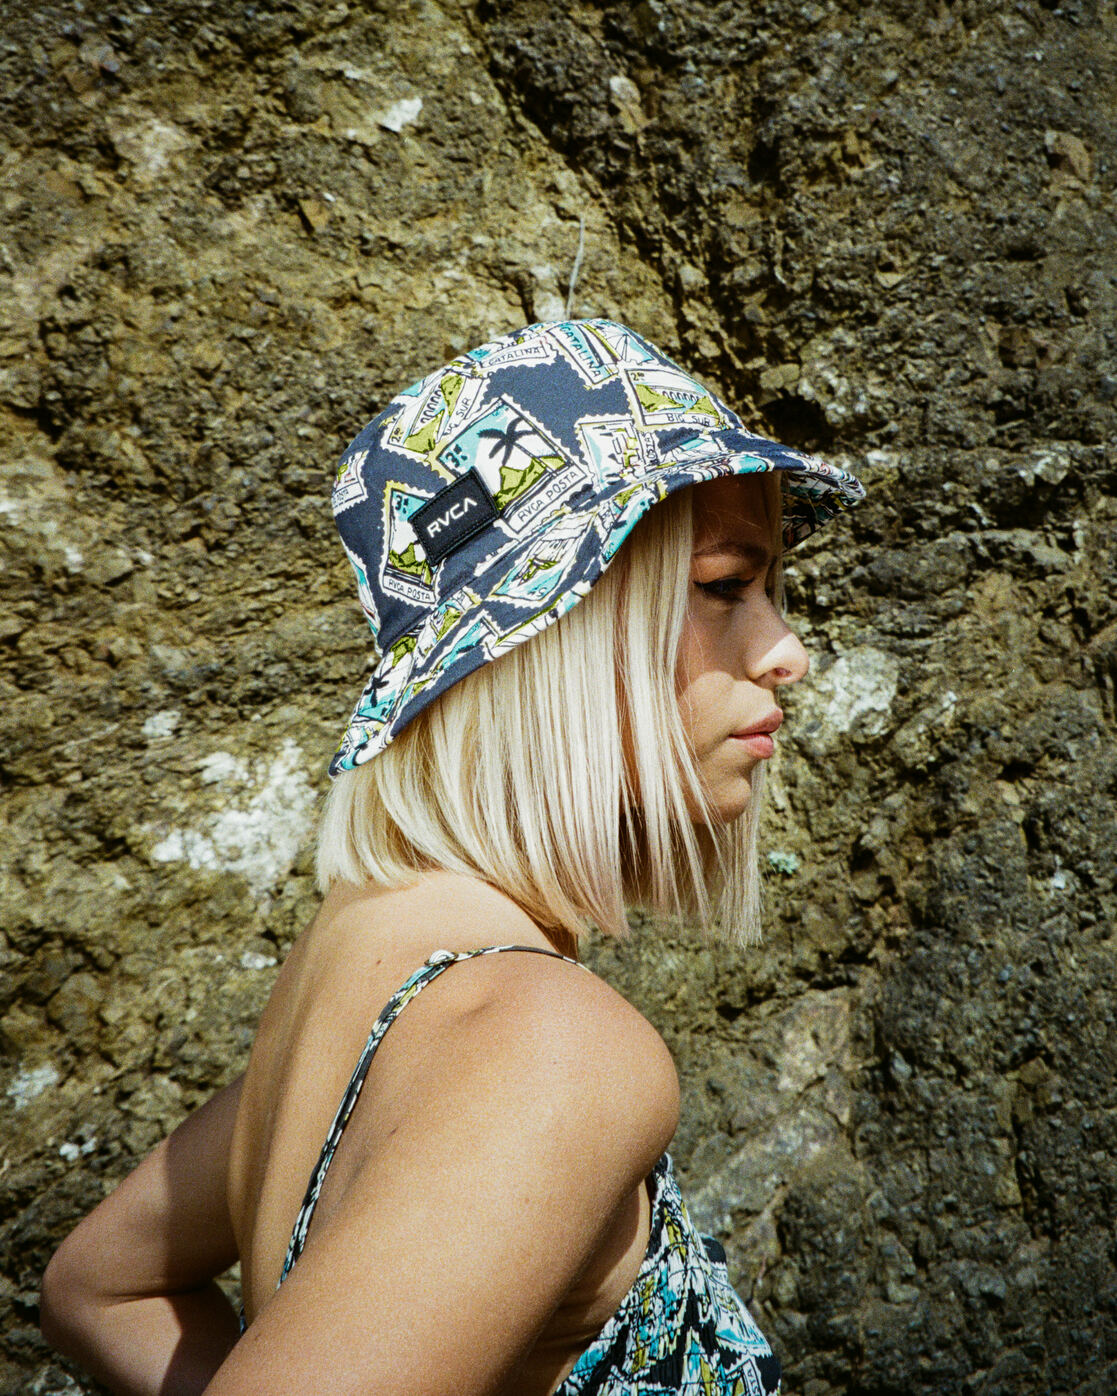 RVCA Forever Bucket Hat